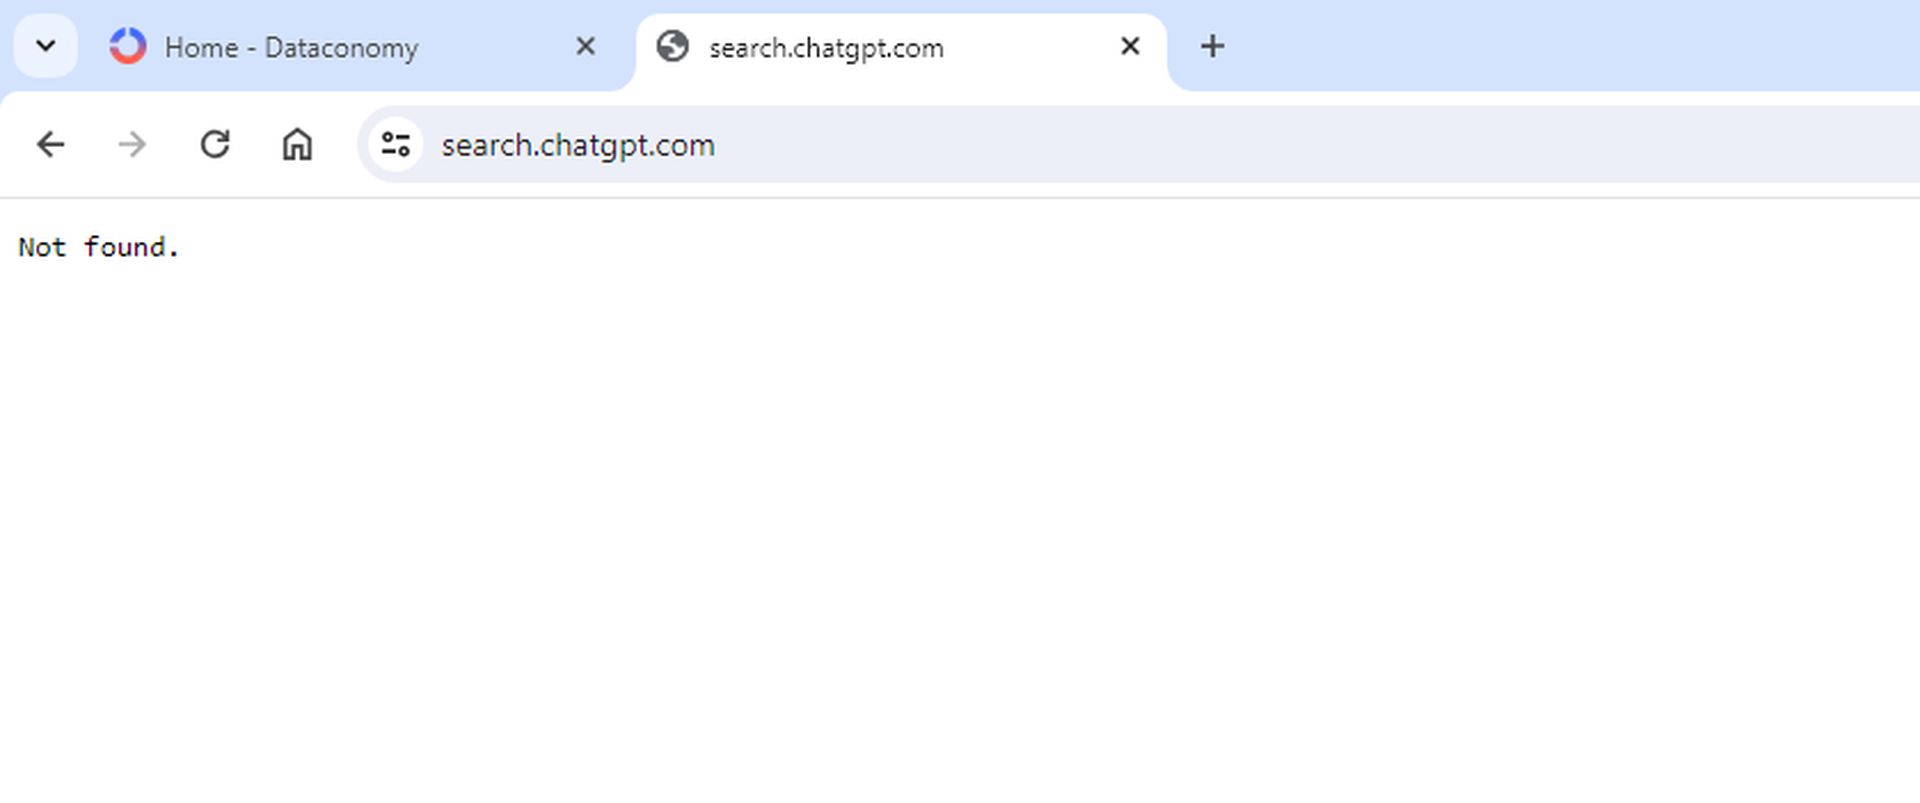 ChatGPT search engine